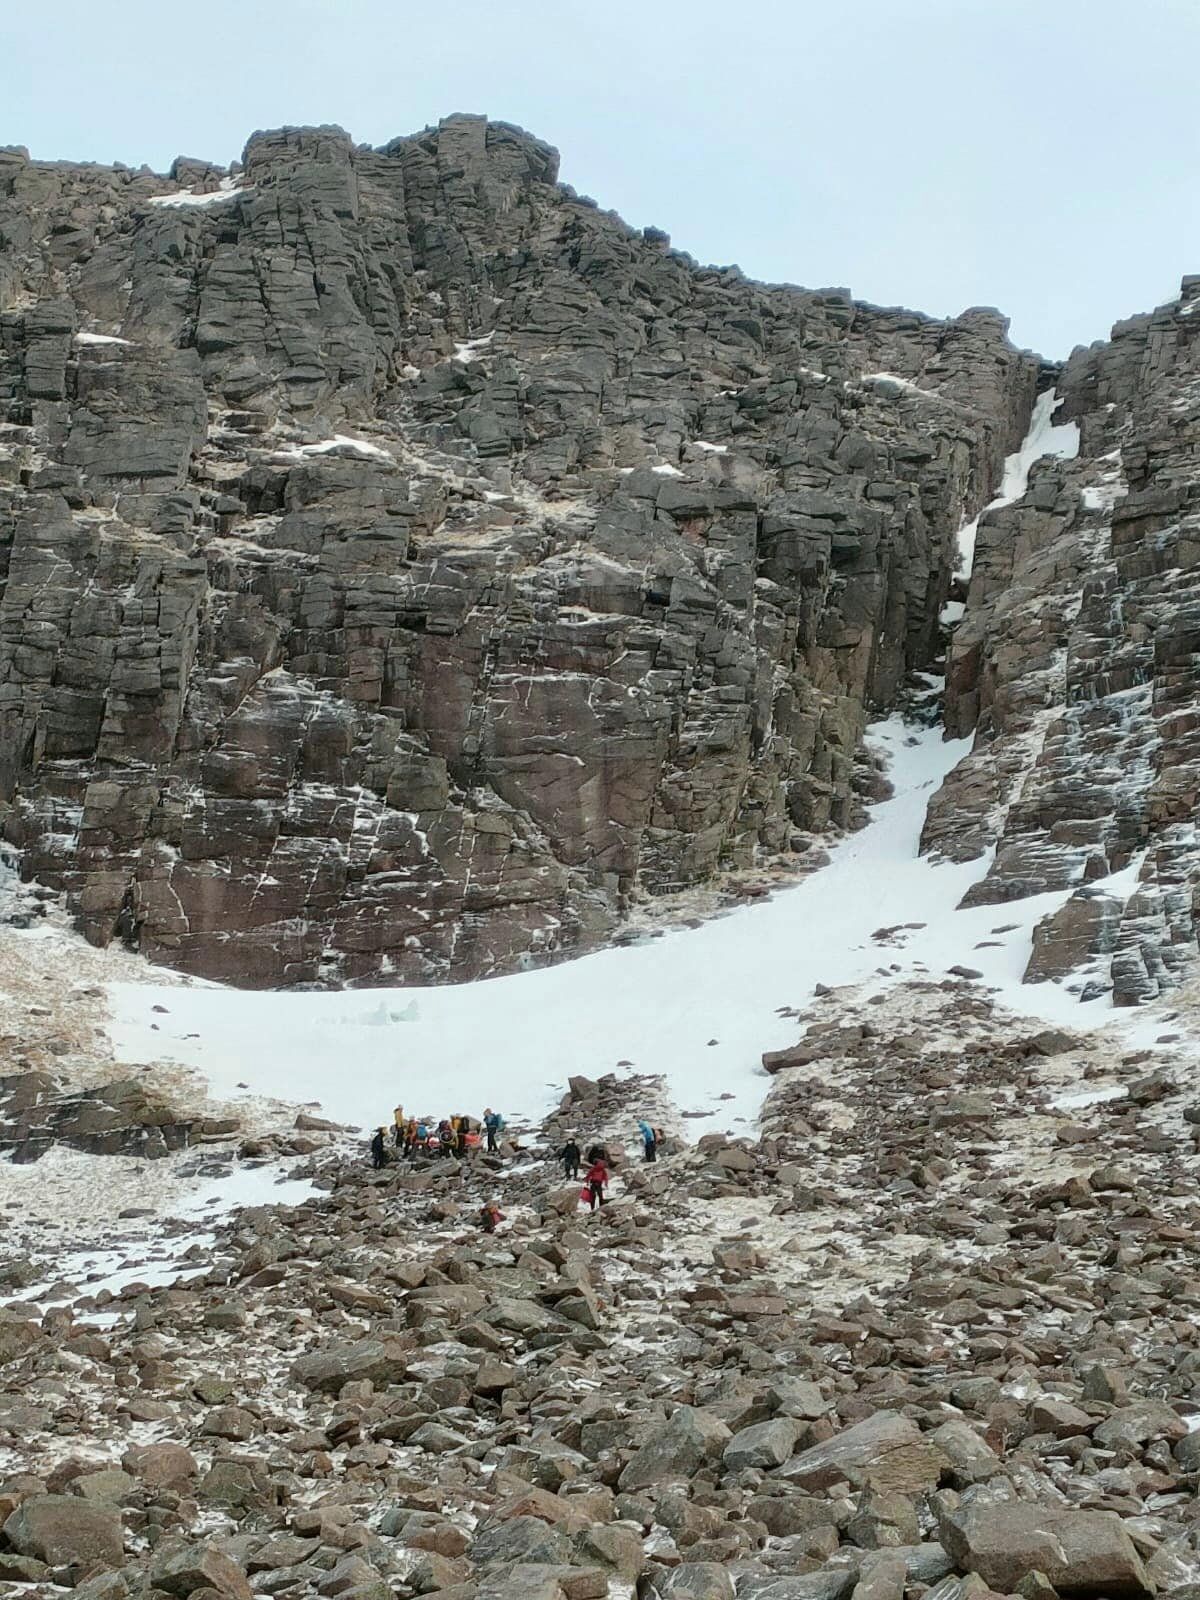 A man, in his 30s, fell around 80m in Coire an t-Sneachda, sliding on compacted snow below Jacob’s Ladder and sustaining injuries to his chest and lower legs.